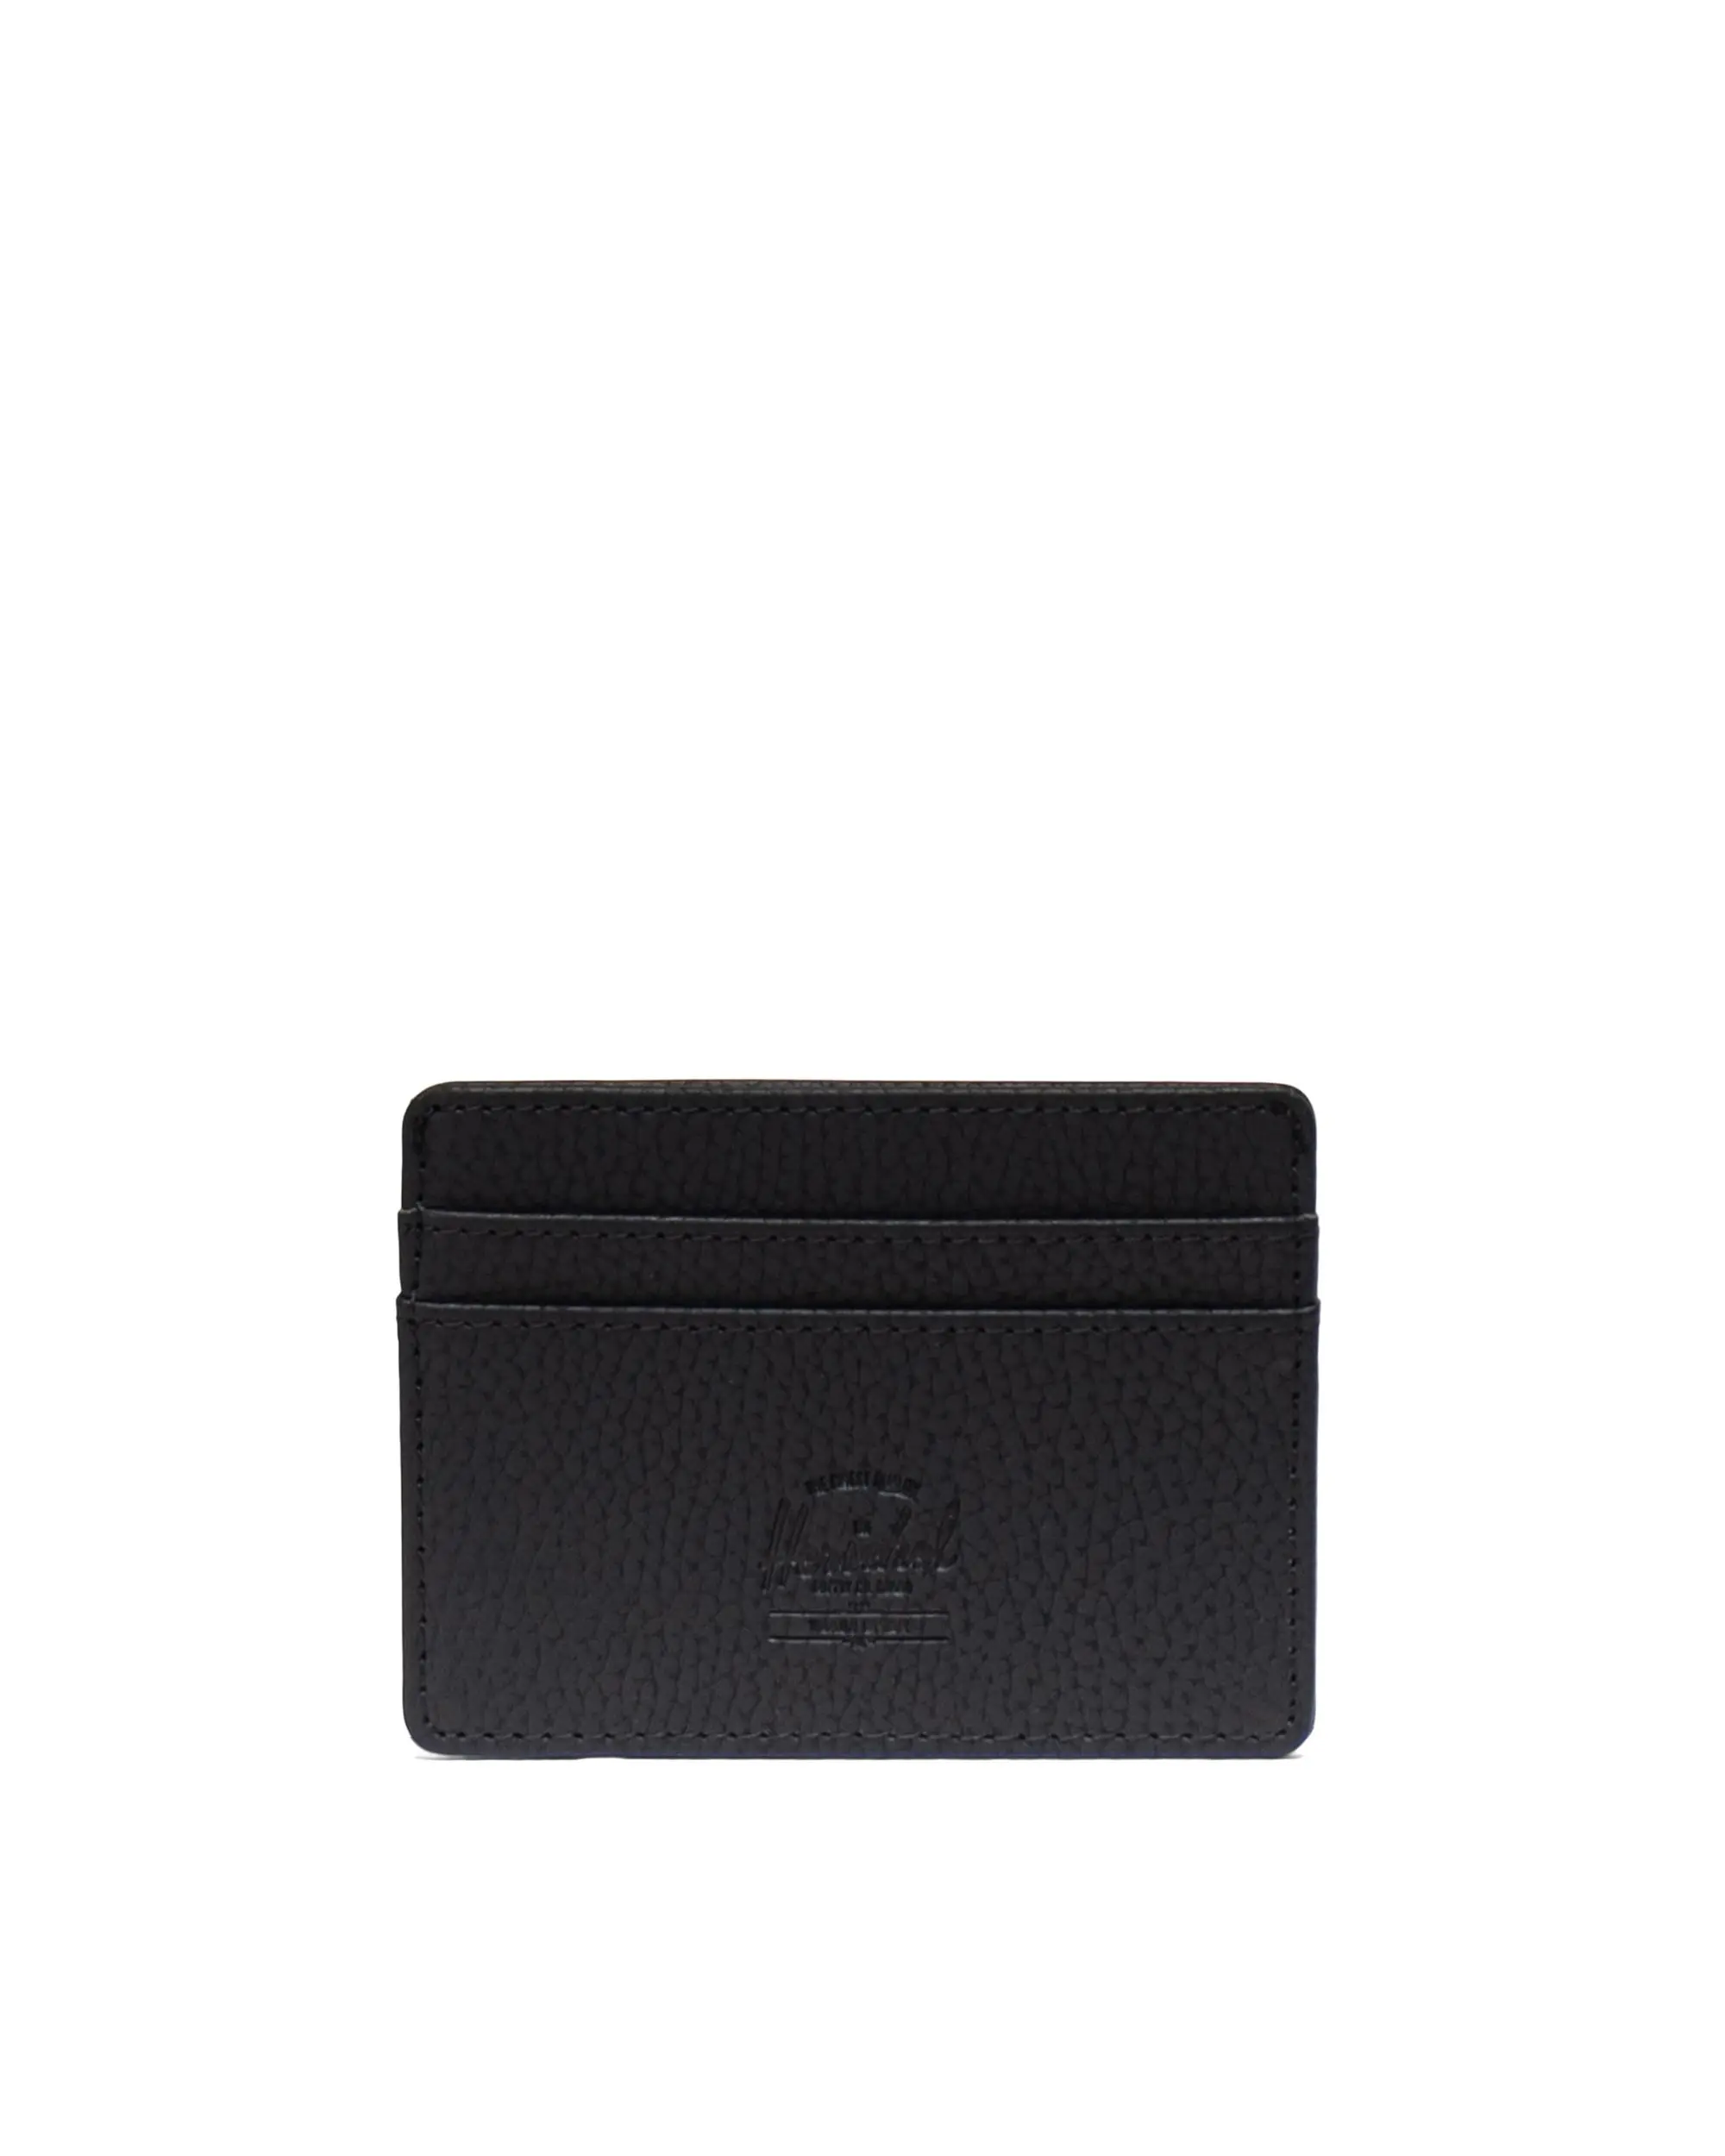 Grey Pebbled Leather Classic Card Holder - Classic Card Holders